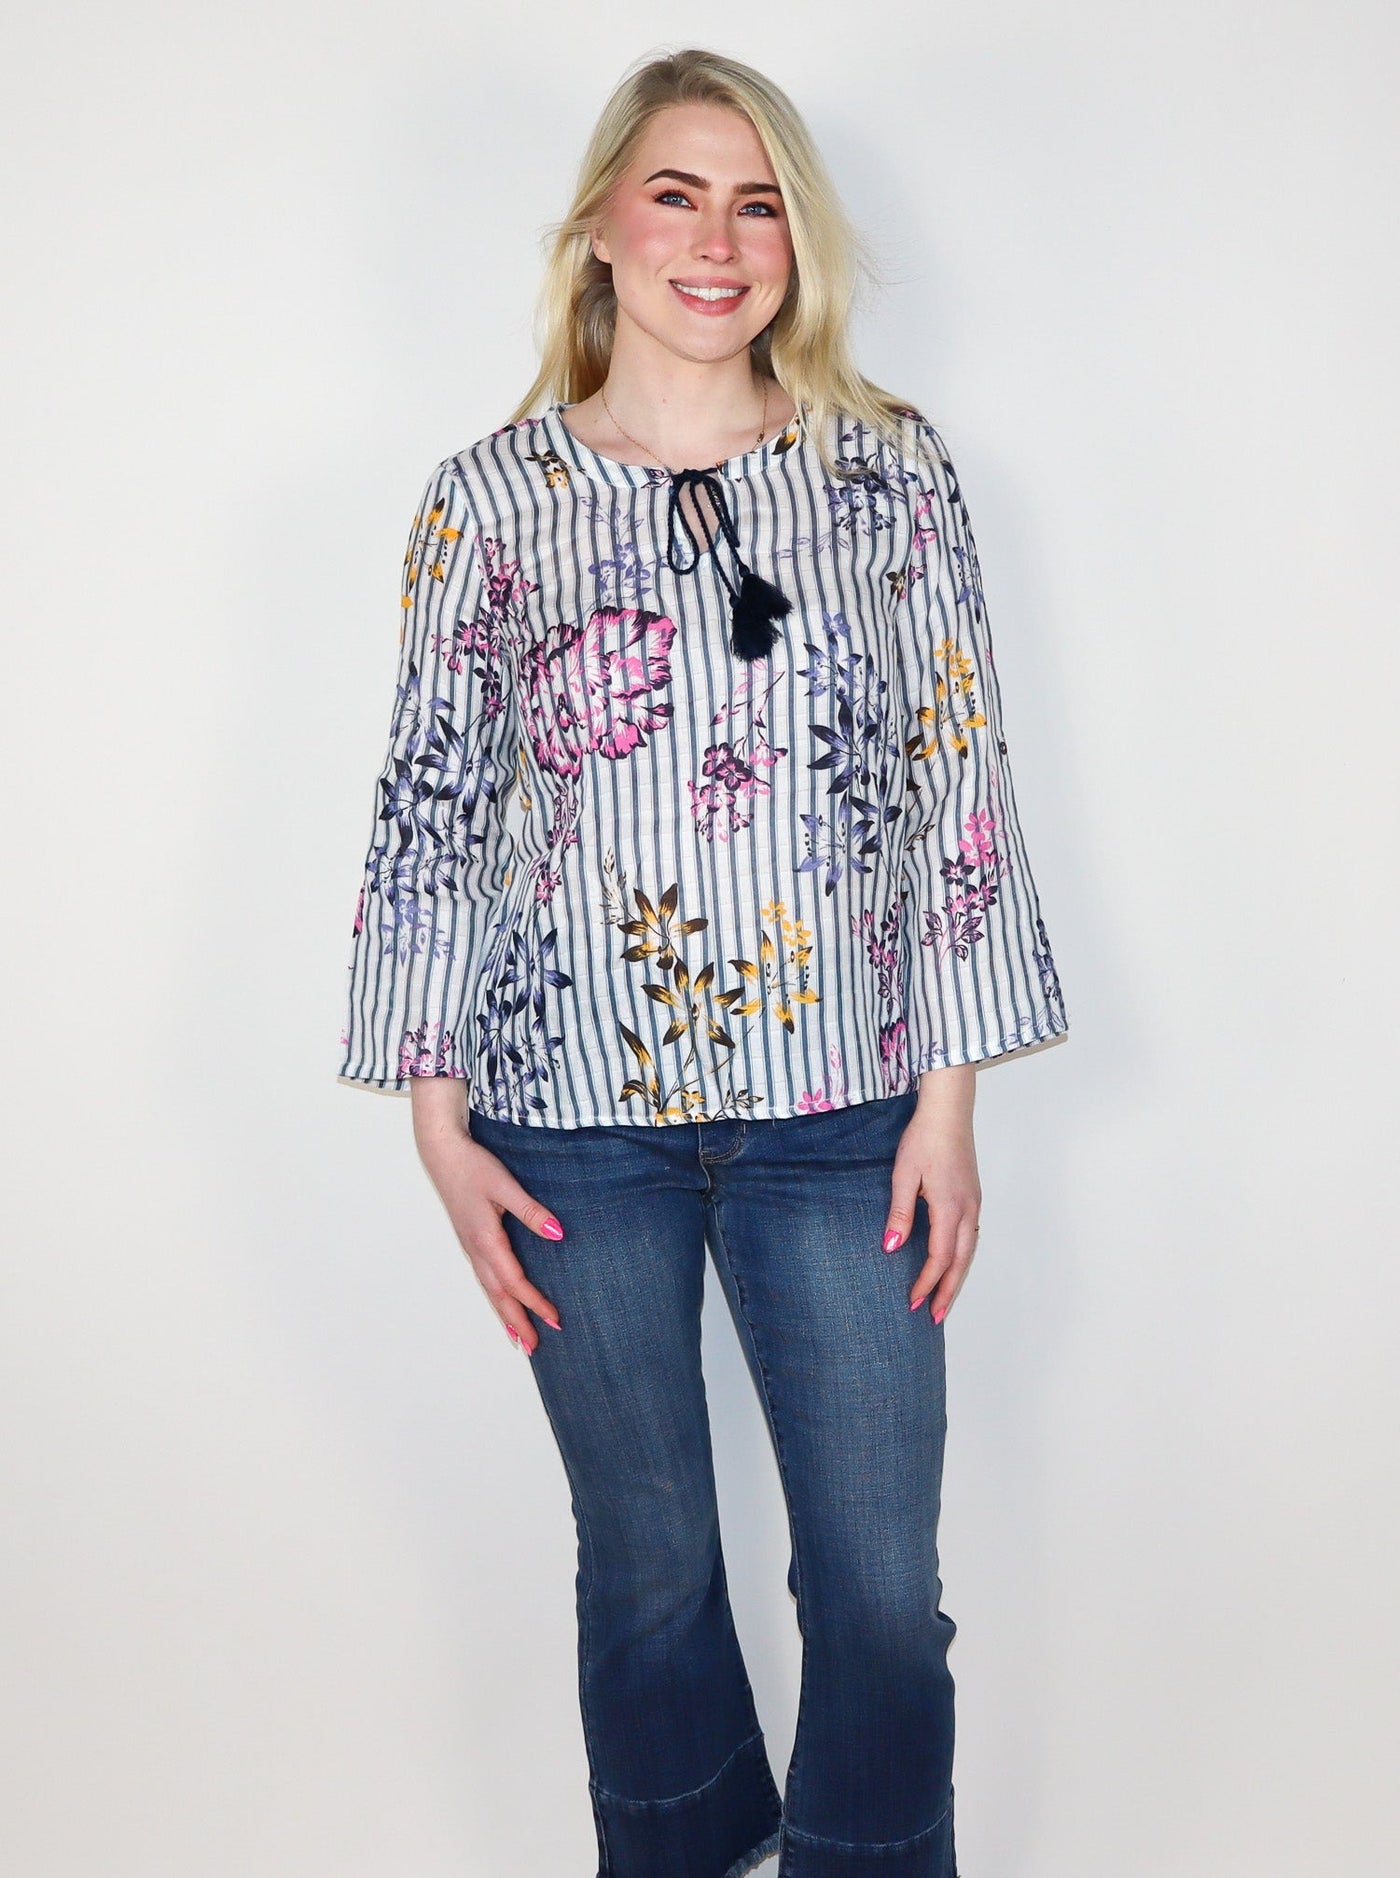 Model is wearing a vertical striped long sleeve blouse with multi color floral detail. The blouse has a string on the neckline for a bowtie detail. Blouse is paired with blue jeans. 